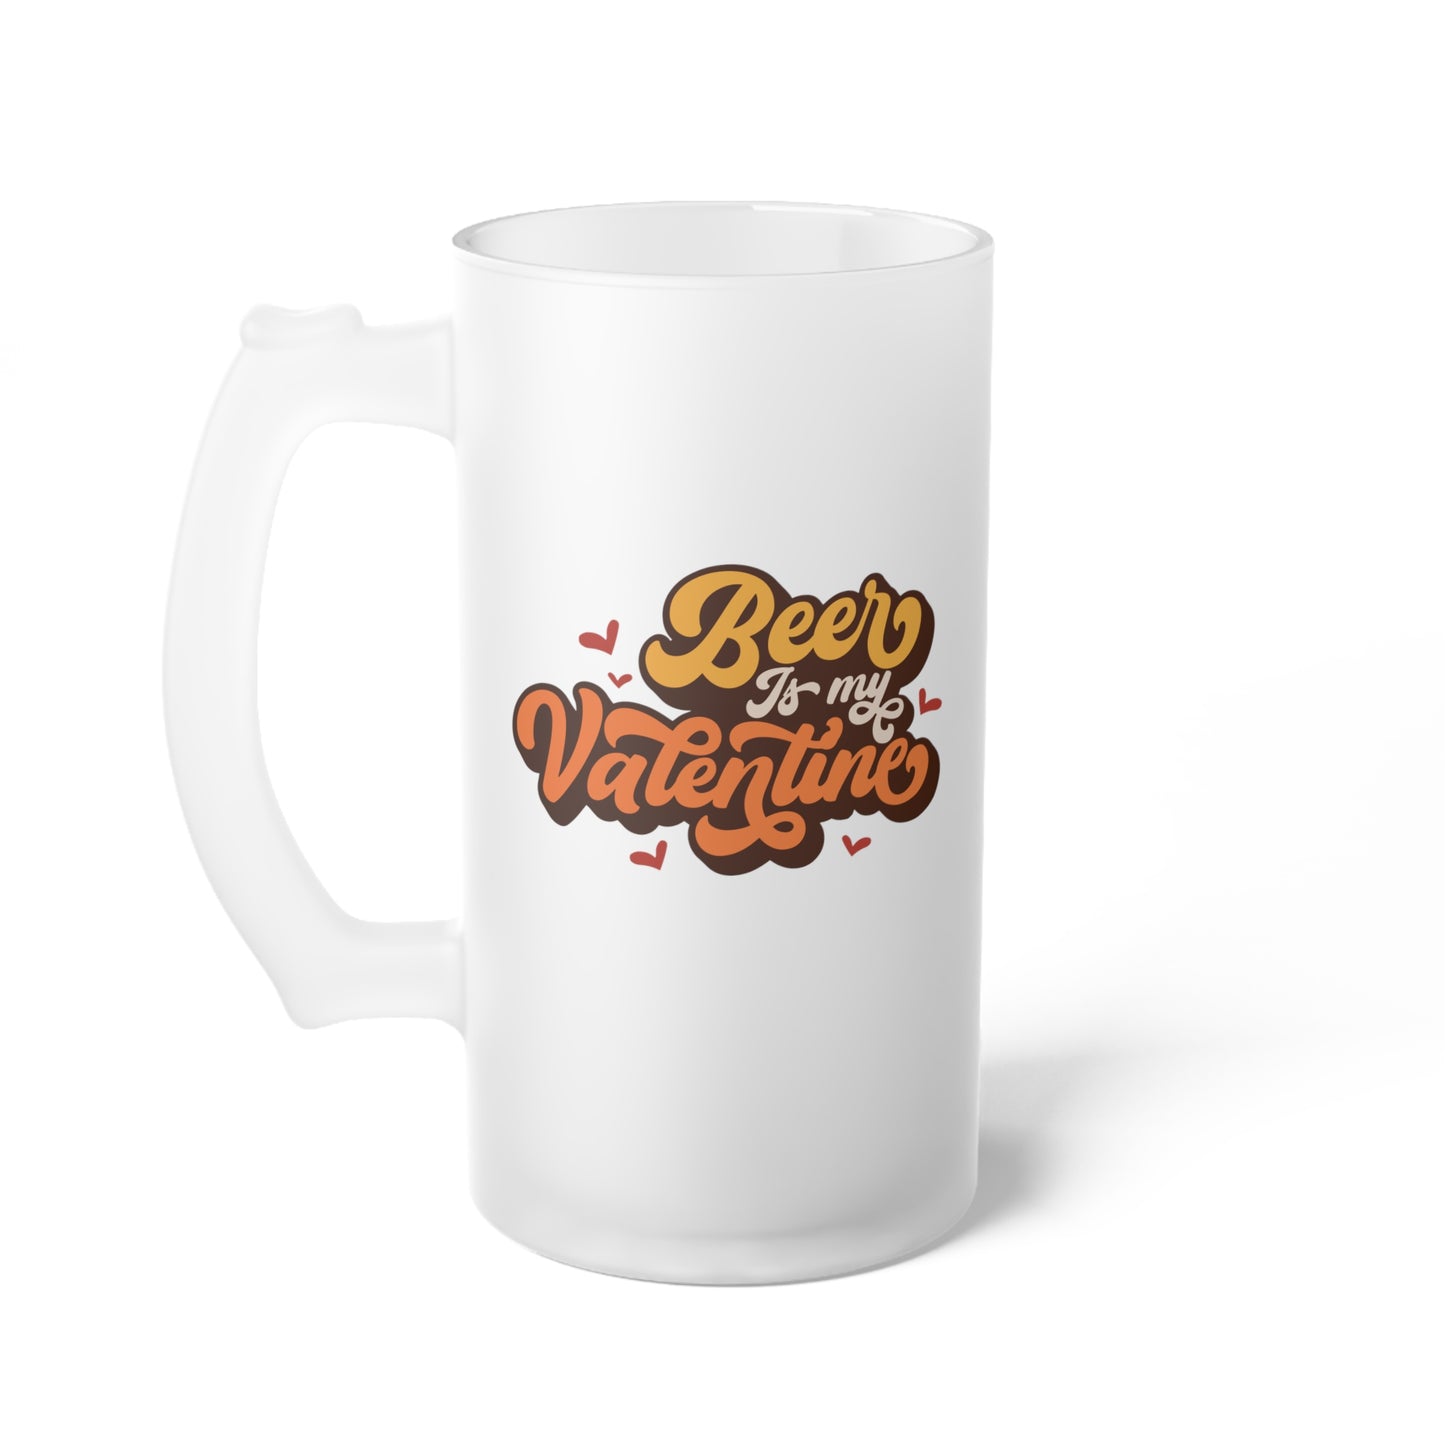 Beer Is My Valentine Frosted Glass Beer Mug